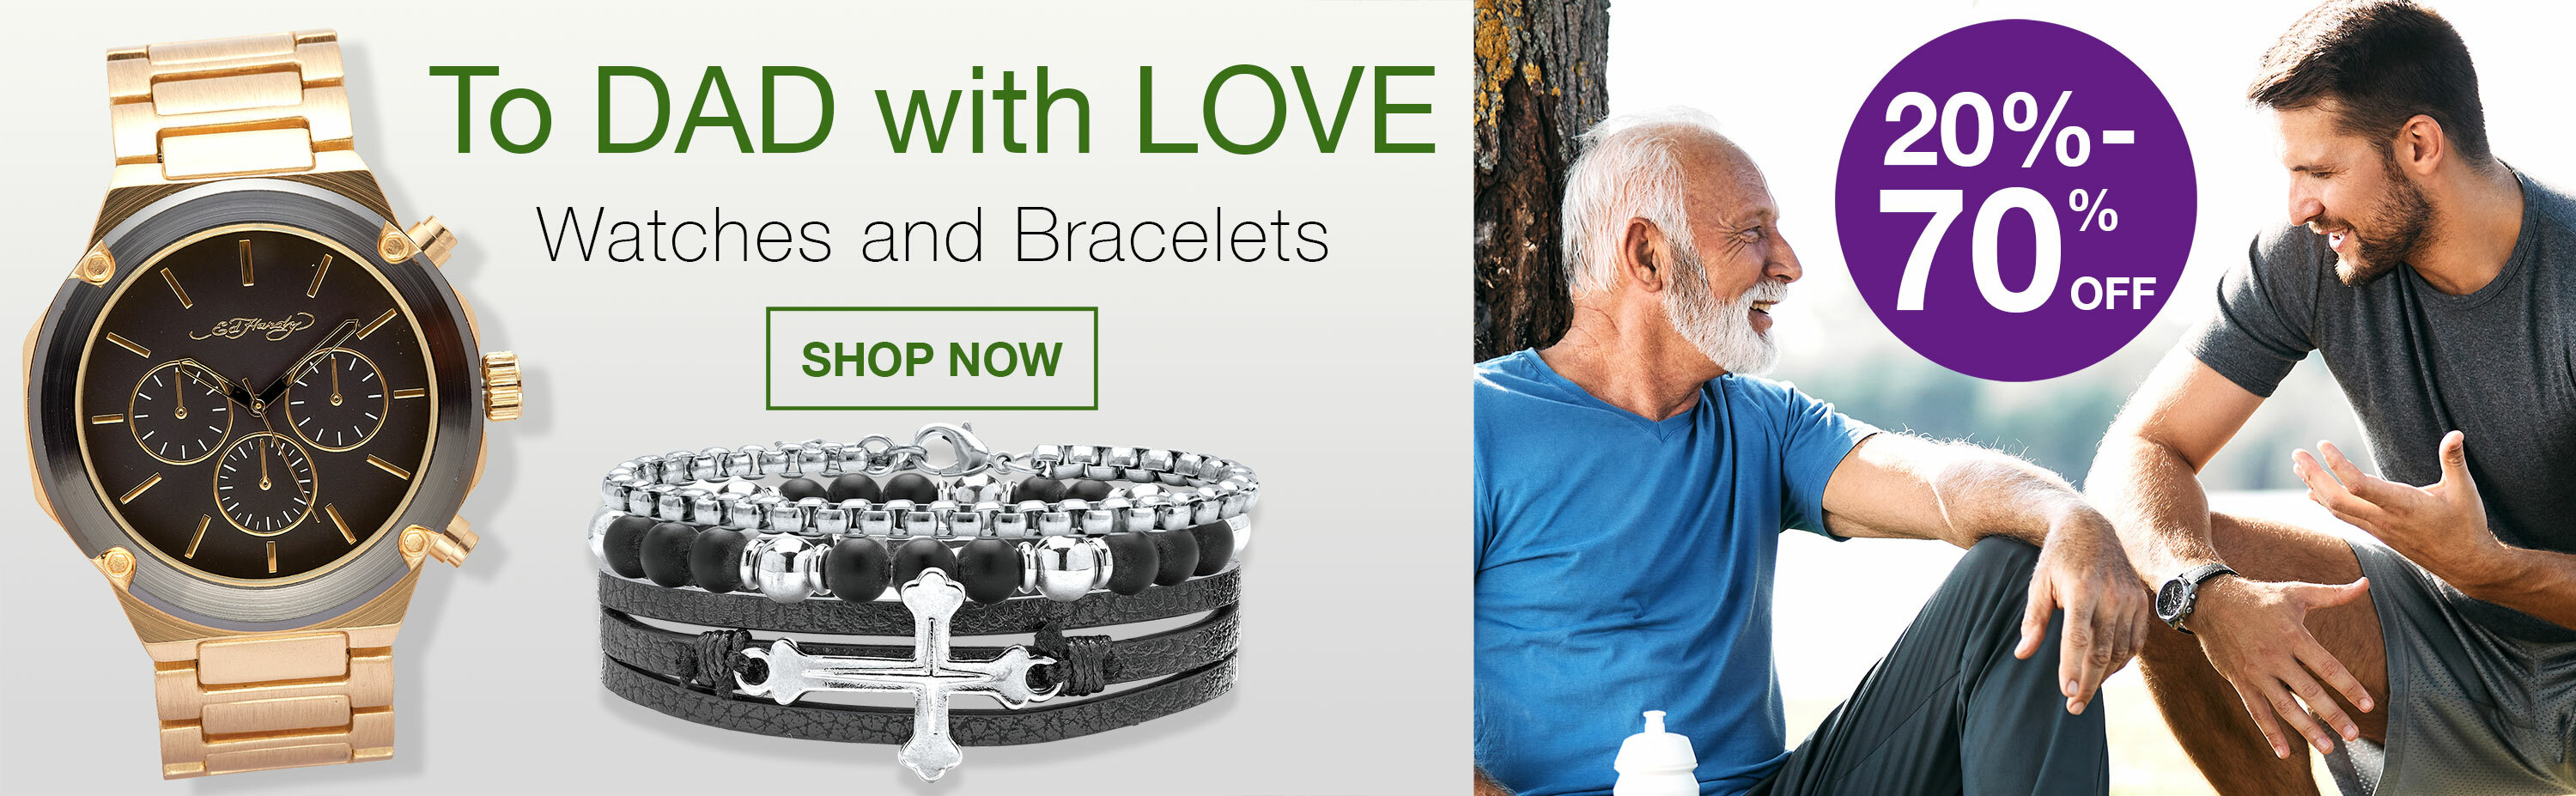 Bracelet & Watch Gifts for Dad